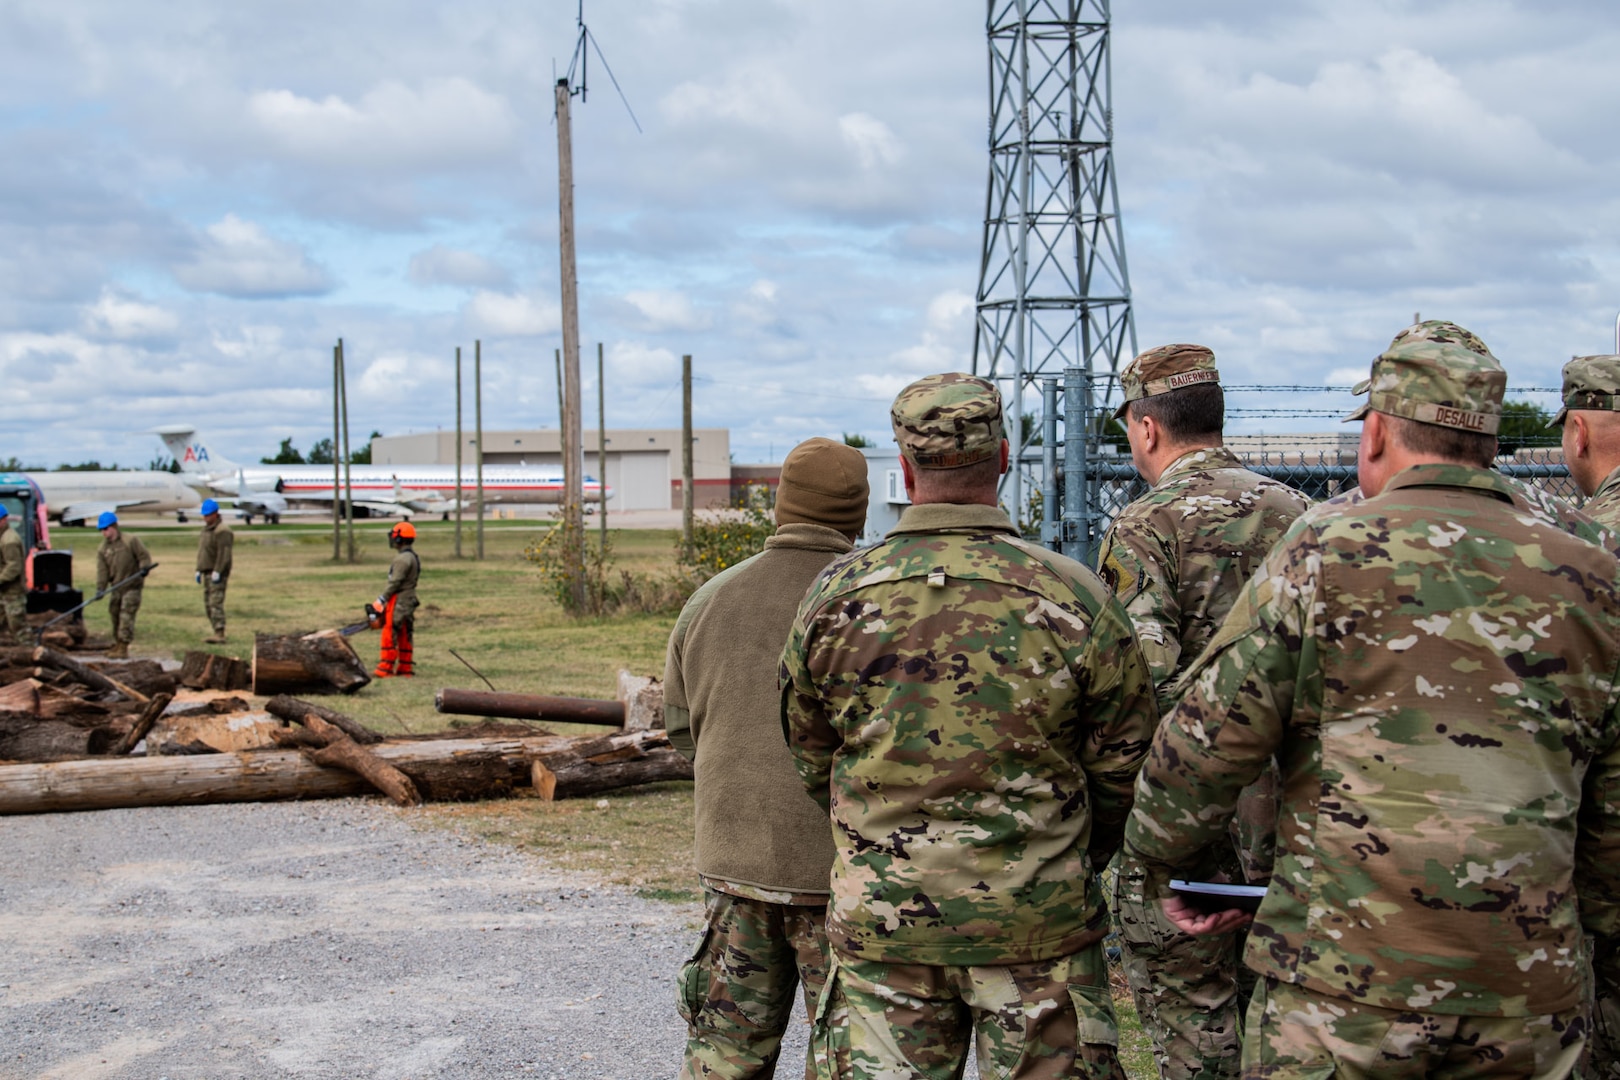 Airmen observe a group of people clearing debris during training